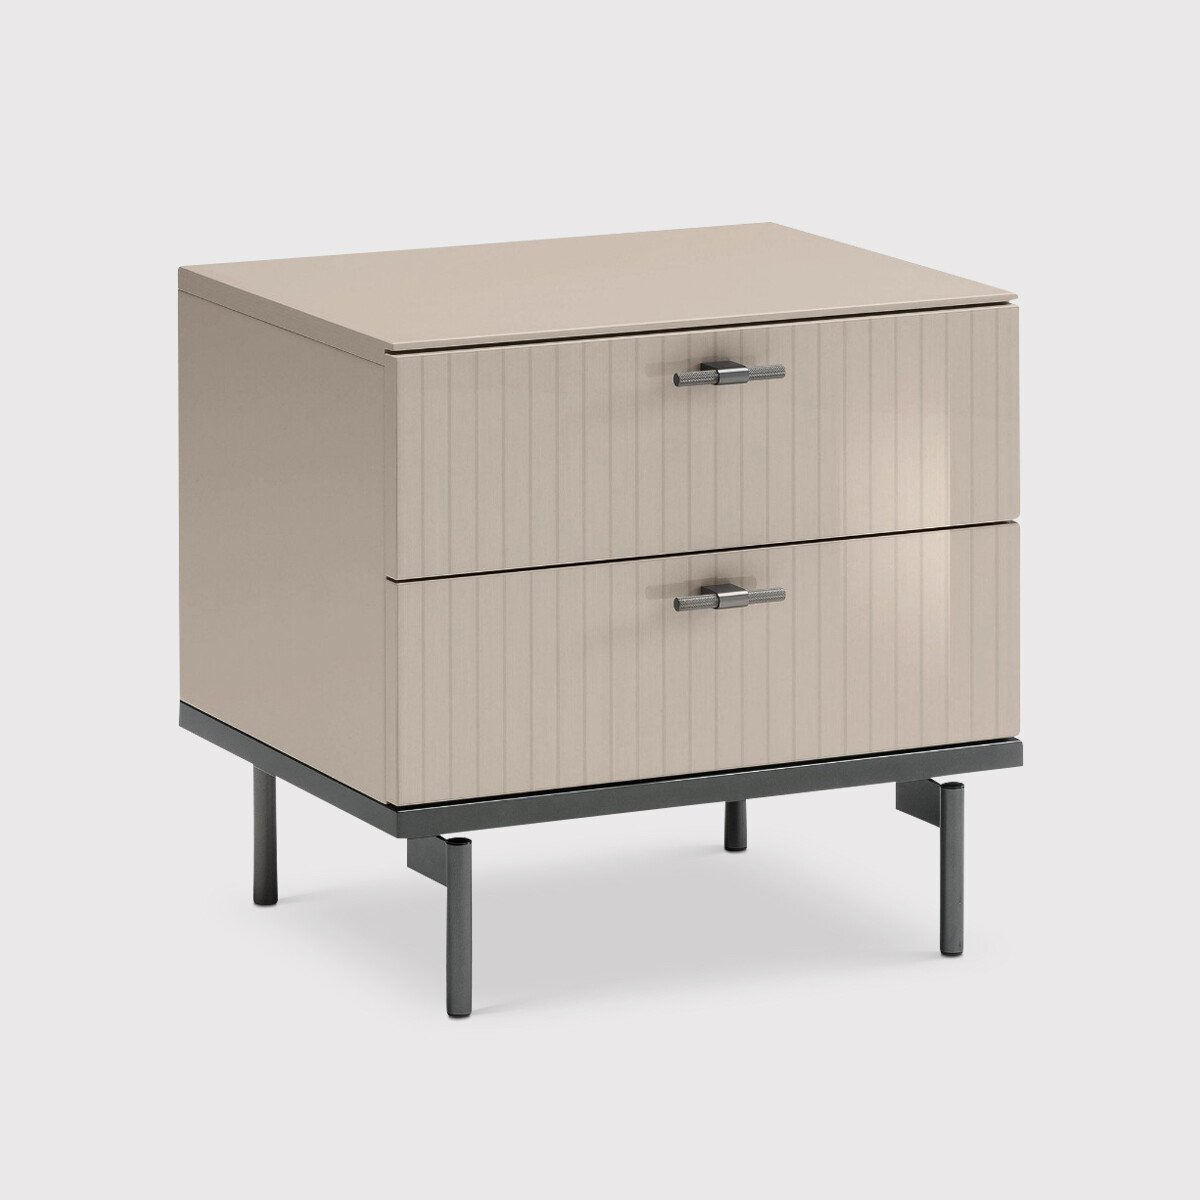 Oriana Bedside Table With 2 Drawers, Neutral - Barker & Stonehouse - image 1